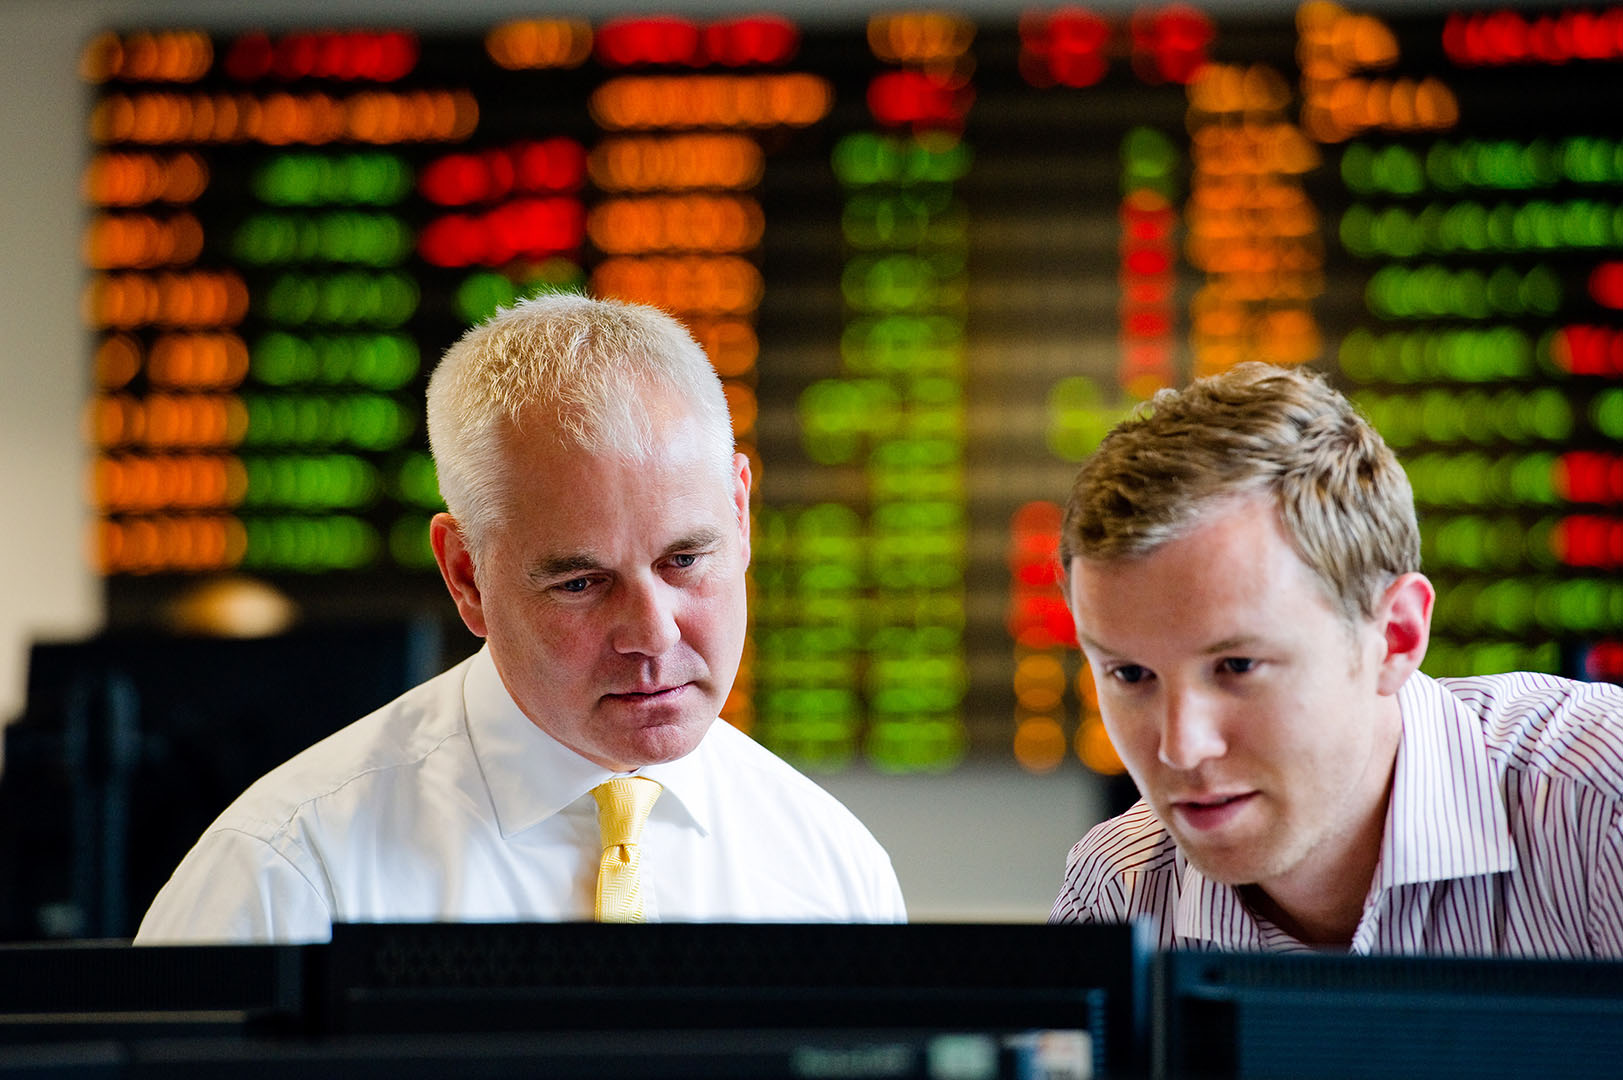 Two male colleagues looking at screen on trading floor with trading board in the background